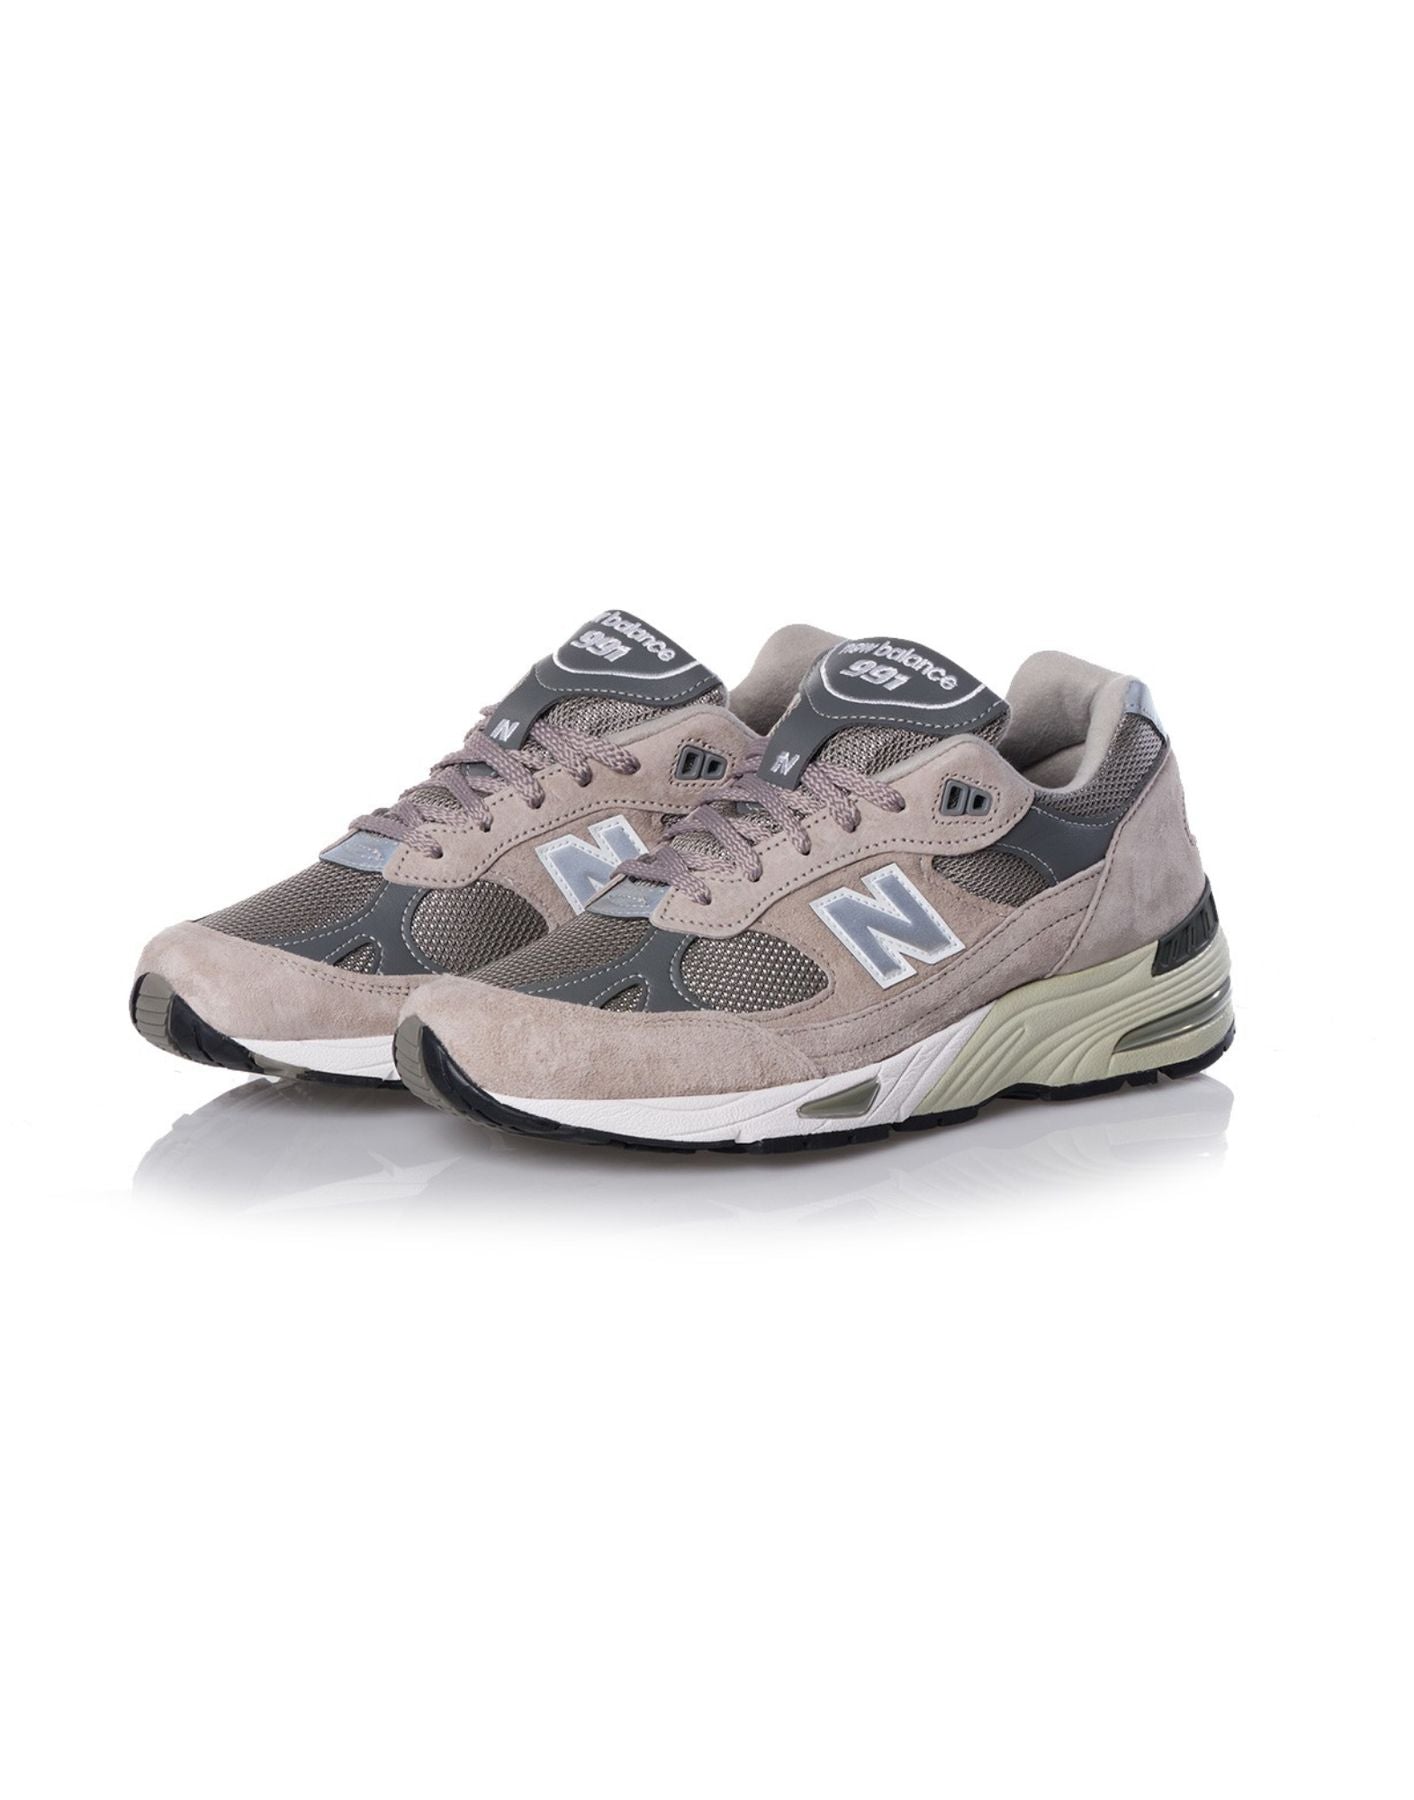 Shoes for man M991GL NEW BALANCE